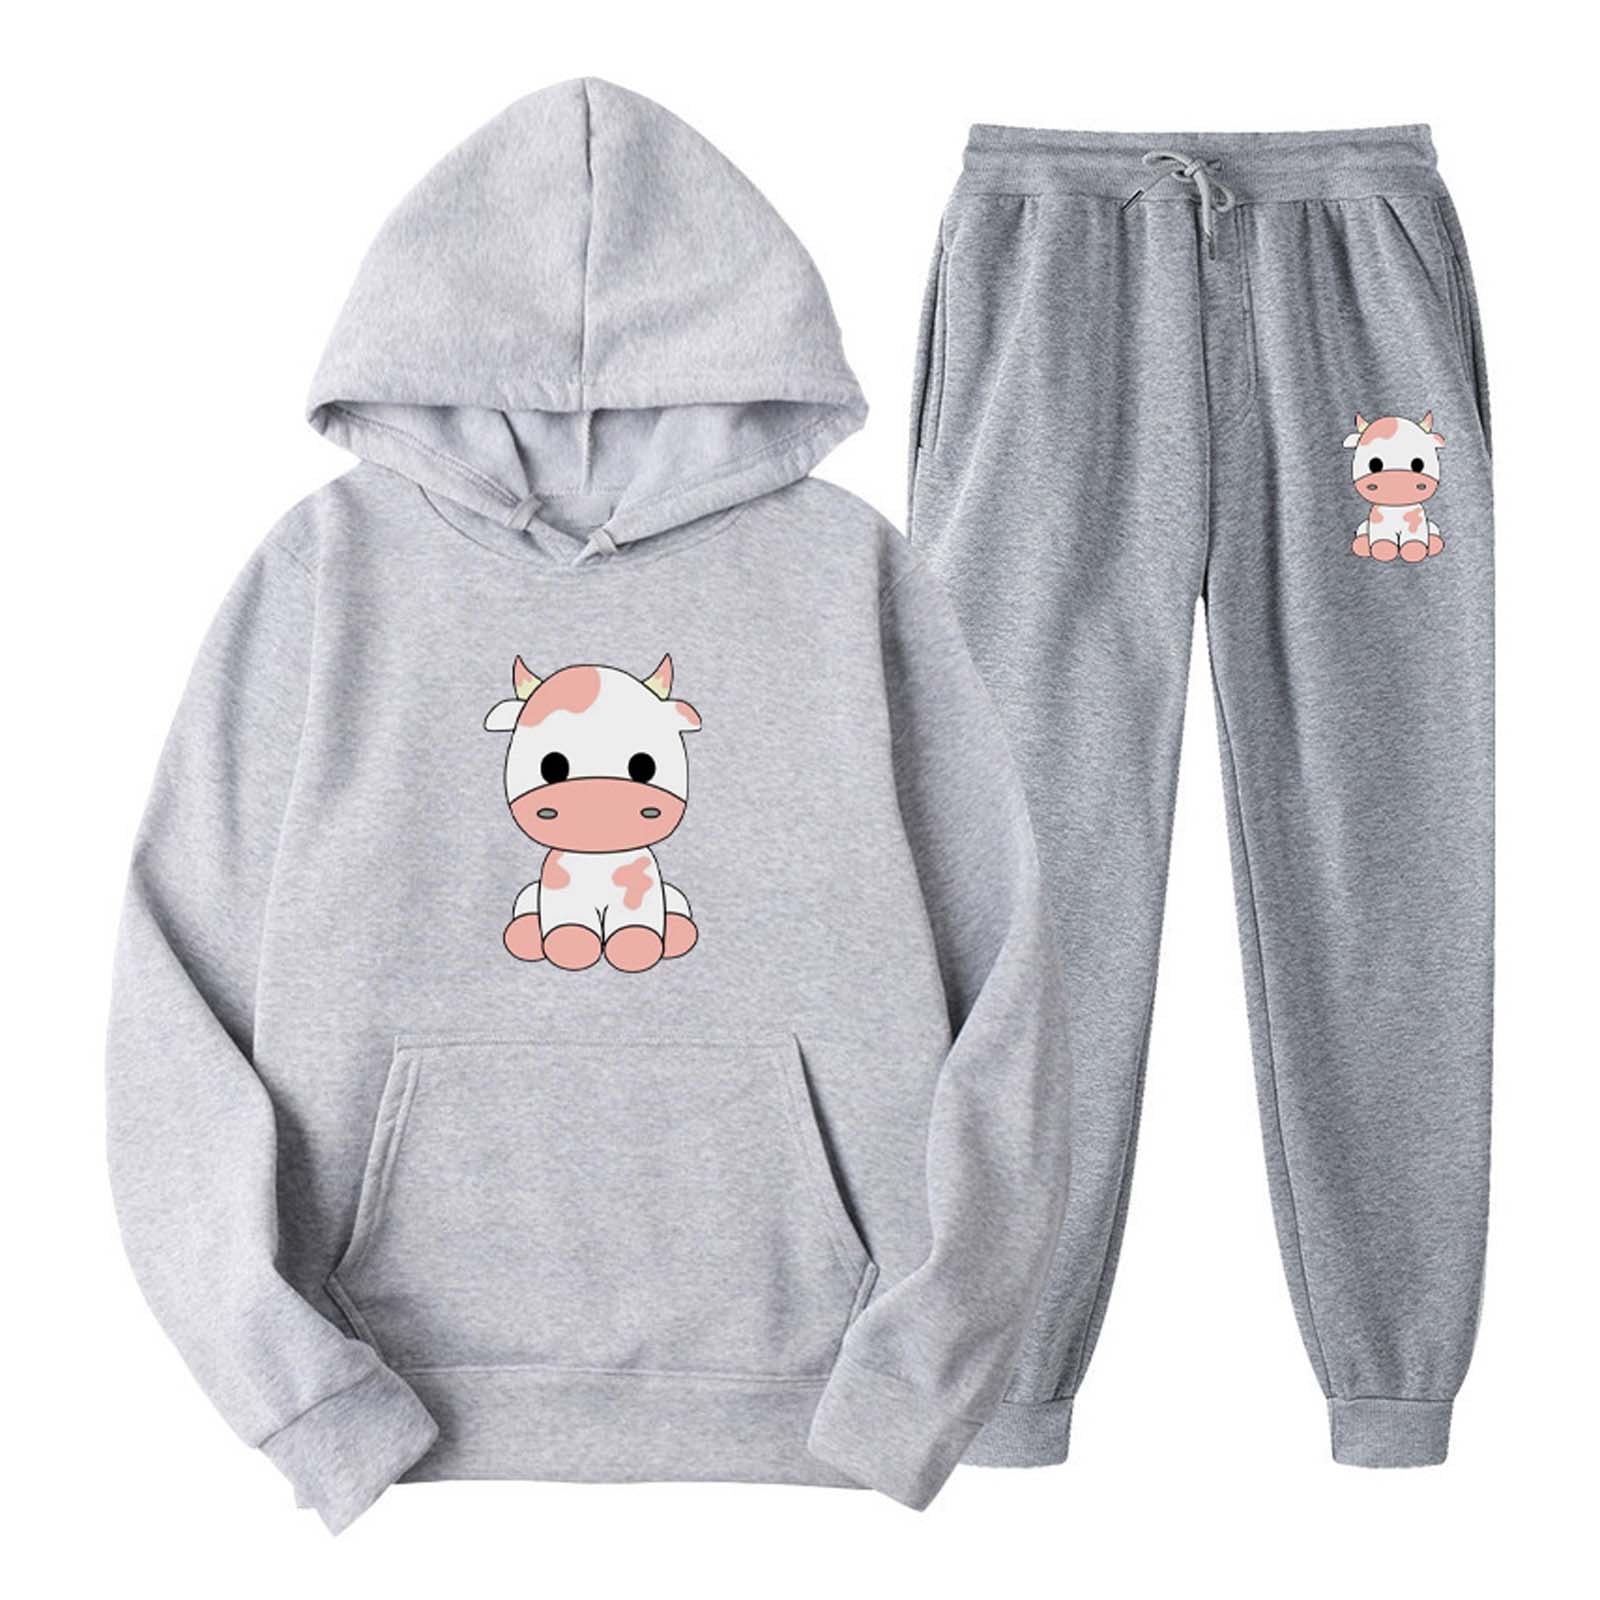 Reduced RQYYD Tracksuits 2Pcs Sets Womens Hoodies Joggers Teen Girls Hooded  Matching Joggers Pants Suit Sweatshirt and Sweatpants with Pockets